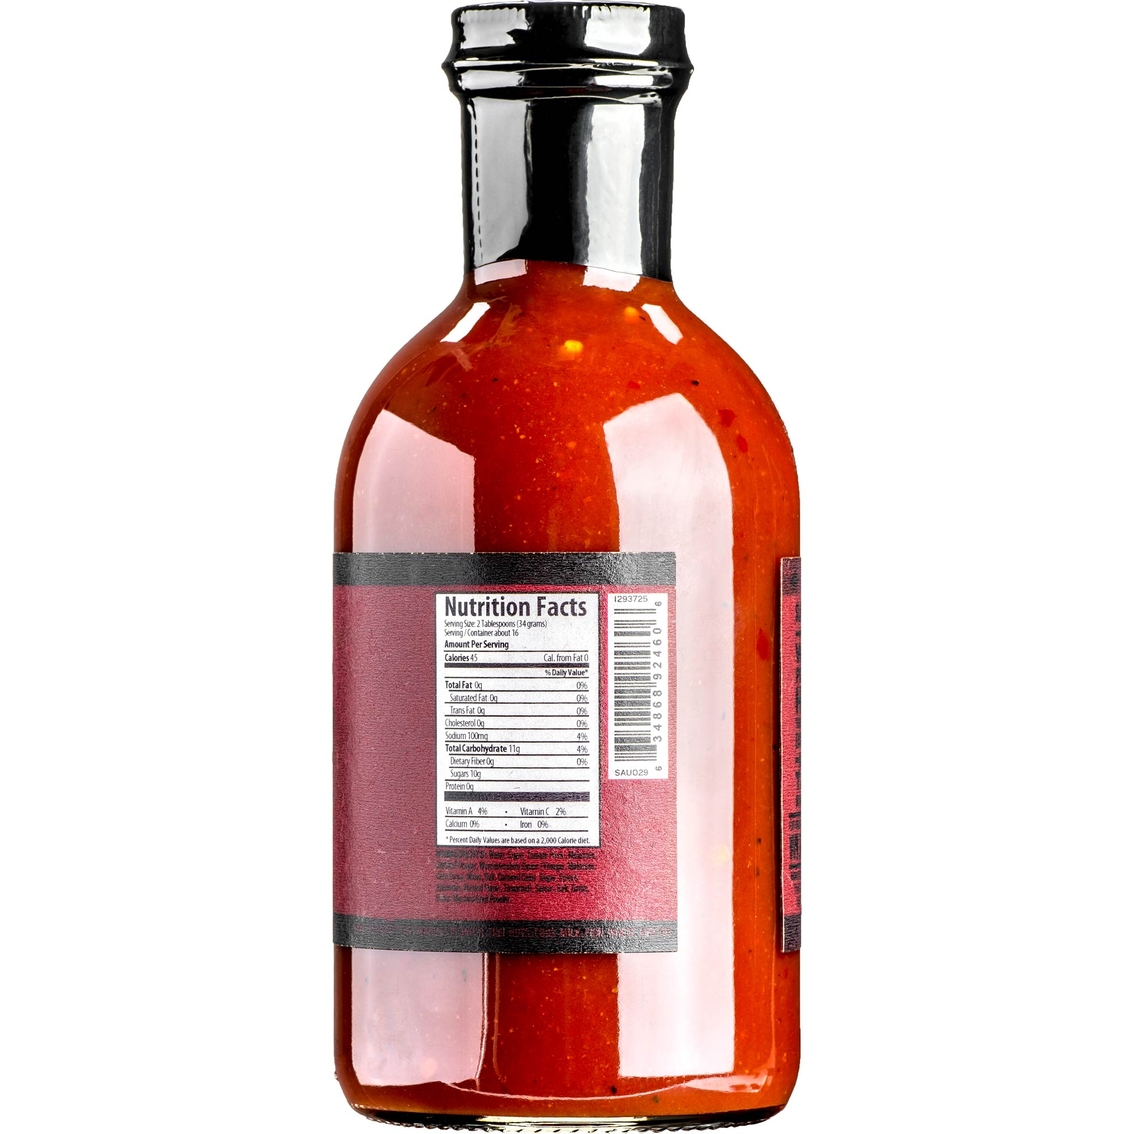 Traeger Texas Spicy BBQ Sauce 16 oz. - Image 3 of 3